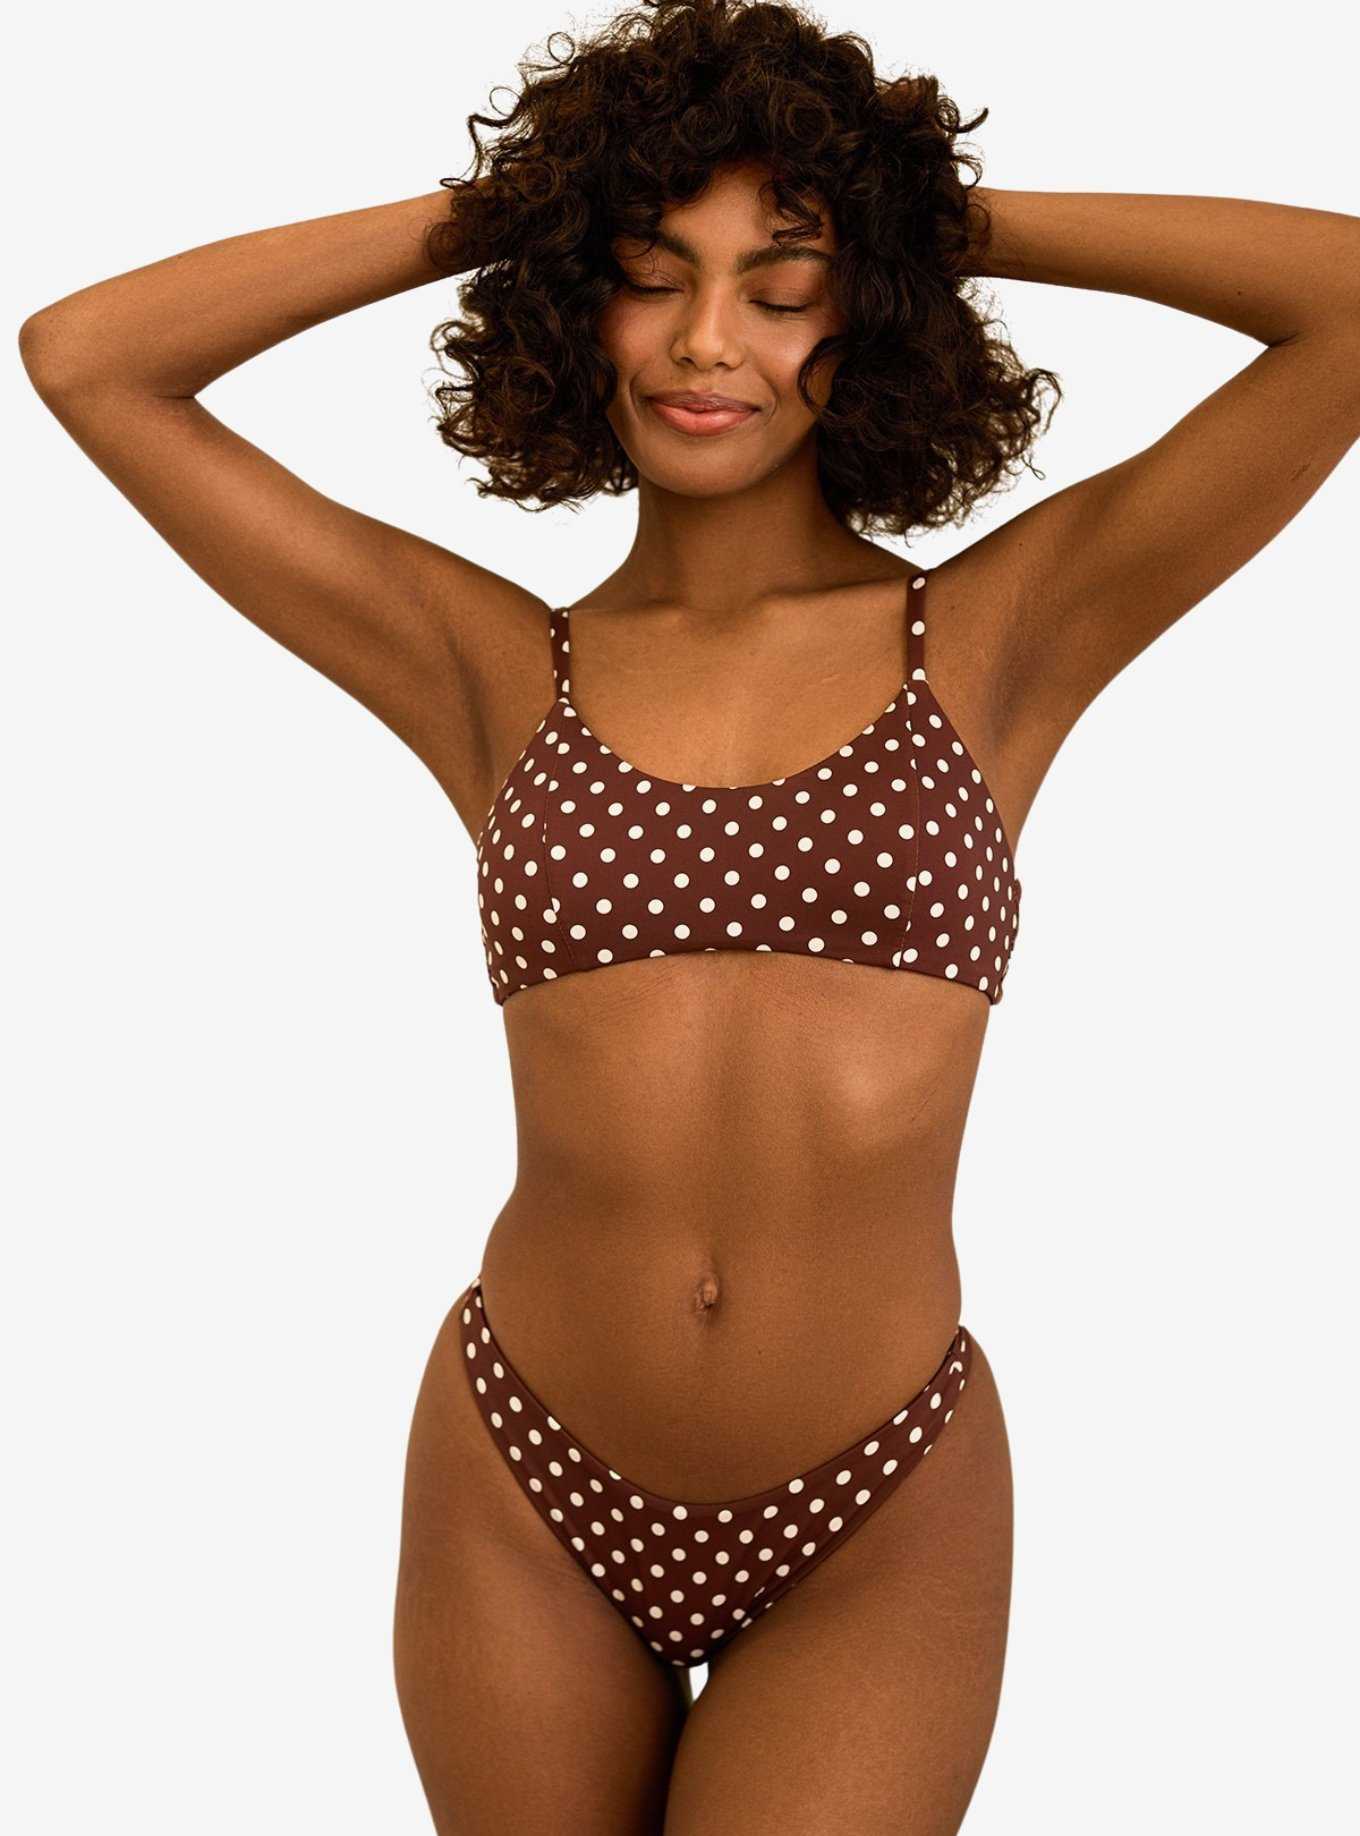 Dippin' Daisy's Seaport High Cut Thong Swim Bottom Dotted Brown, , hi-res